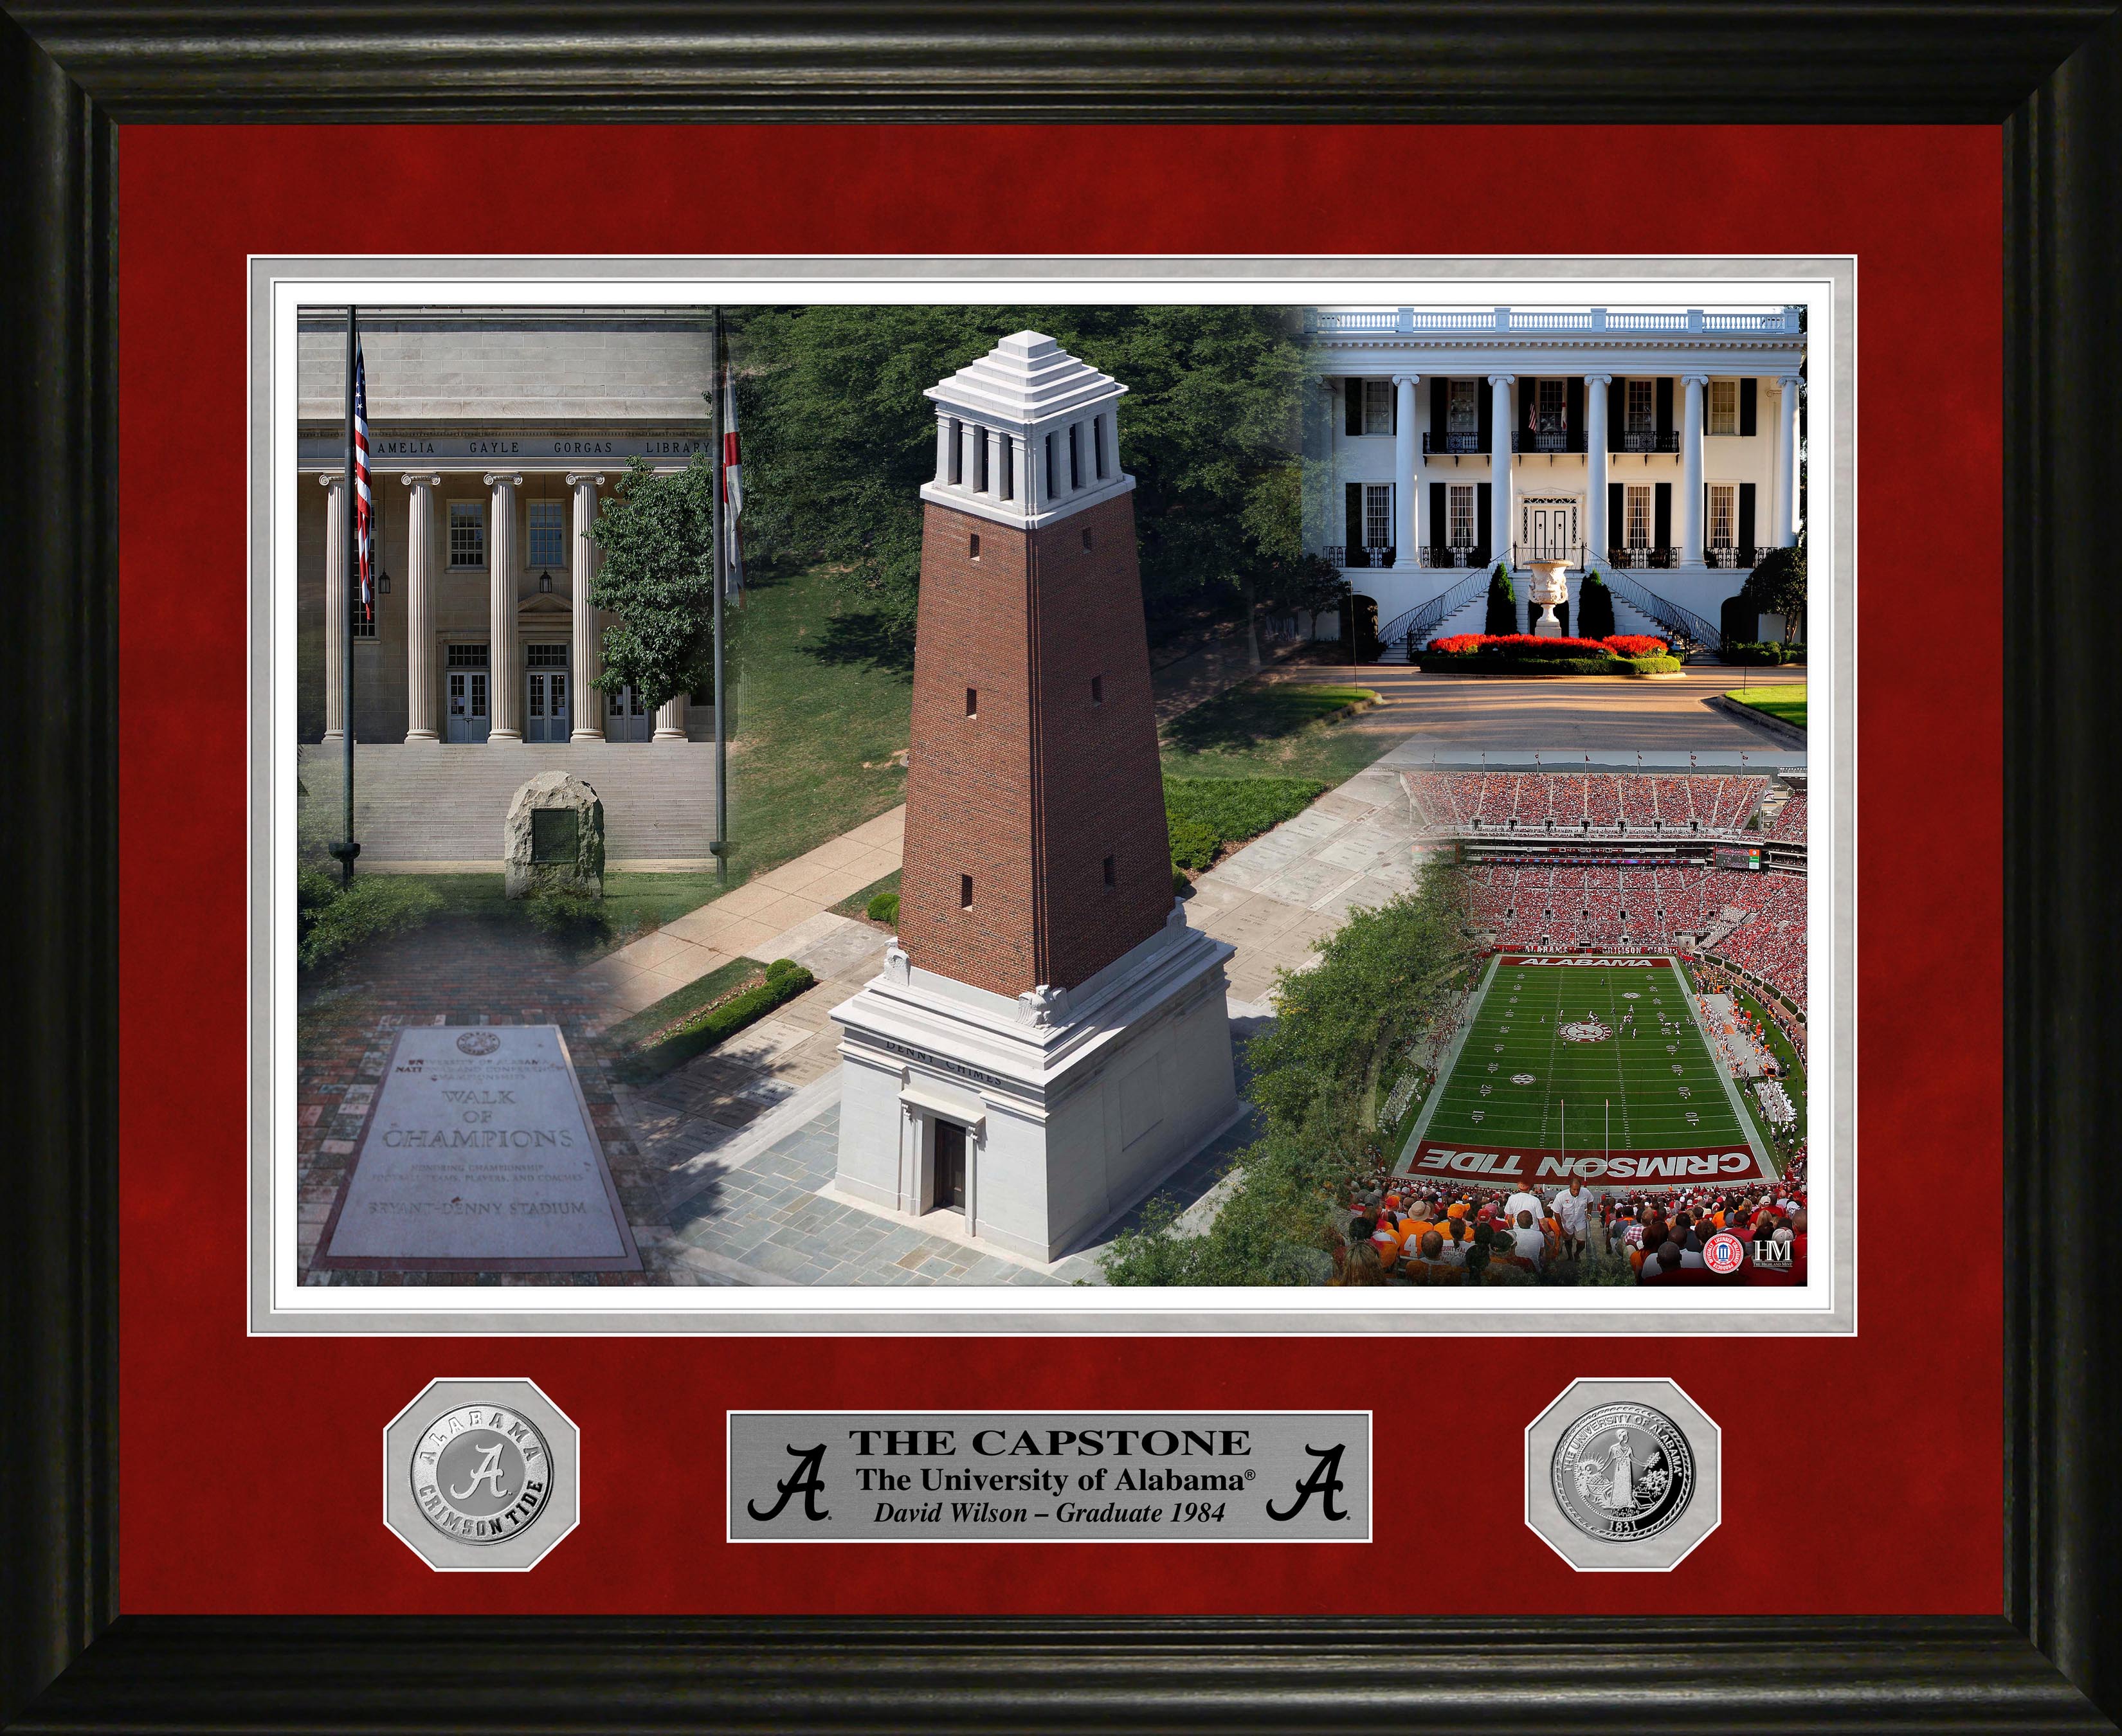 Item: A framed picture of denny chimes, gorgas, and pres mansion with two silver coins